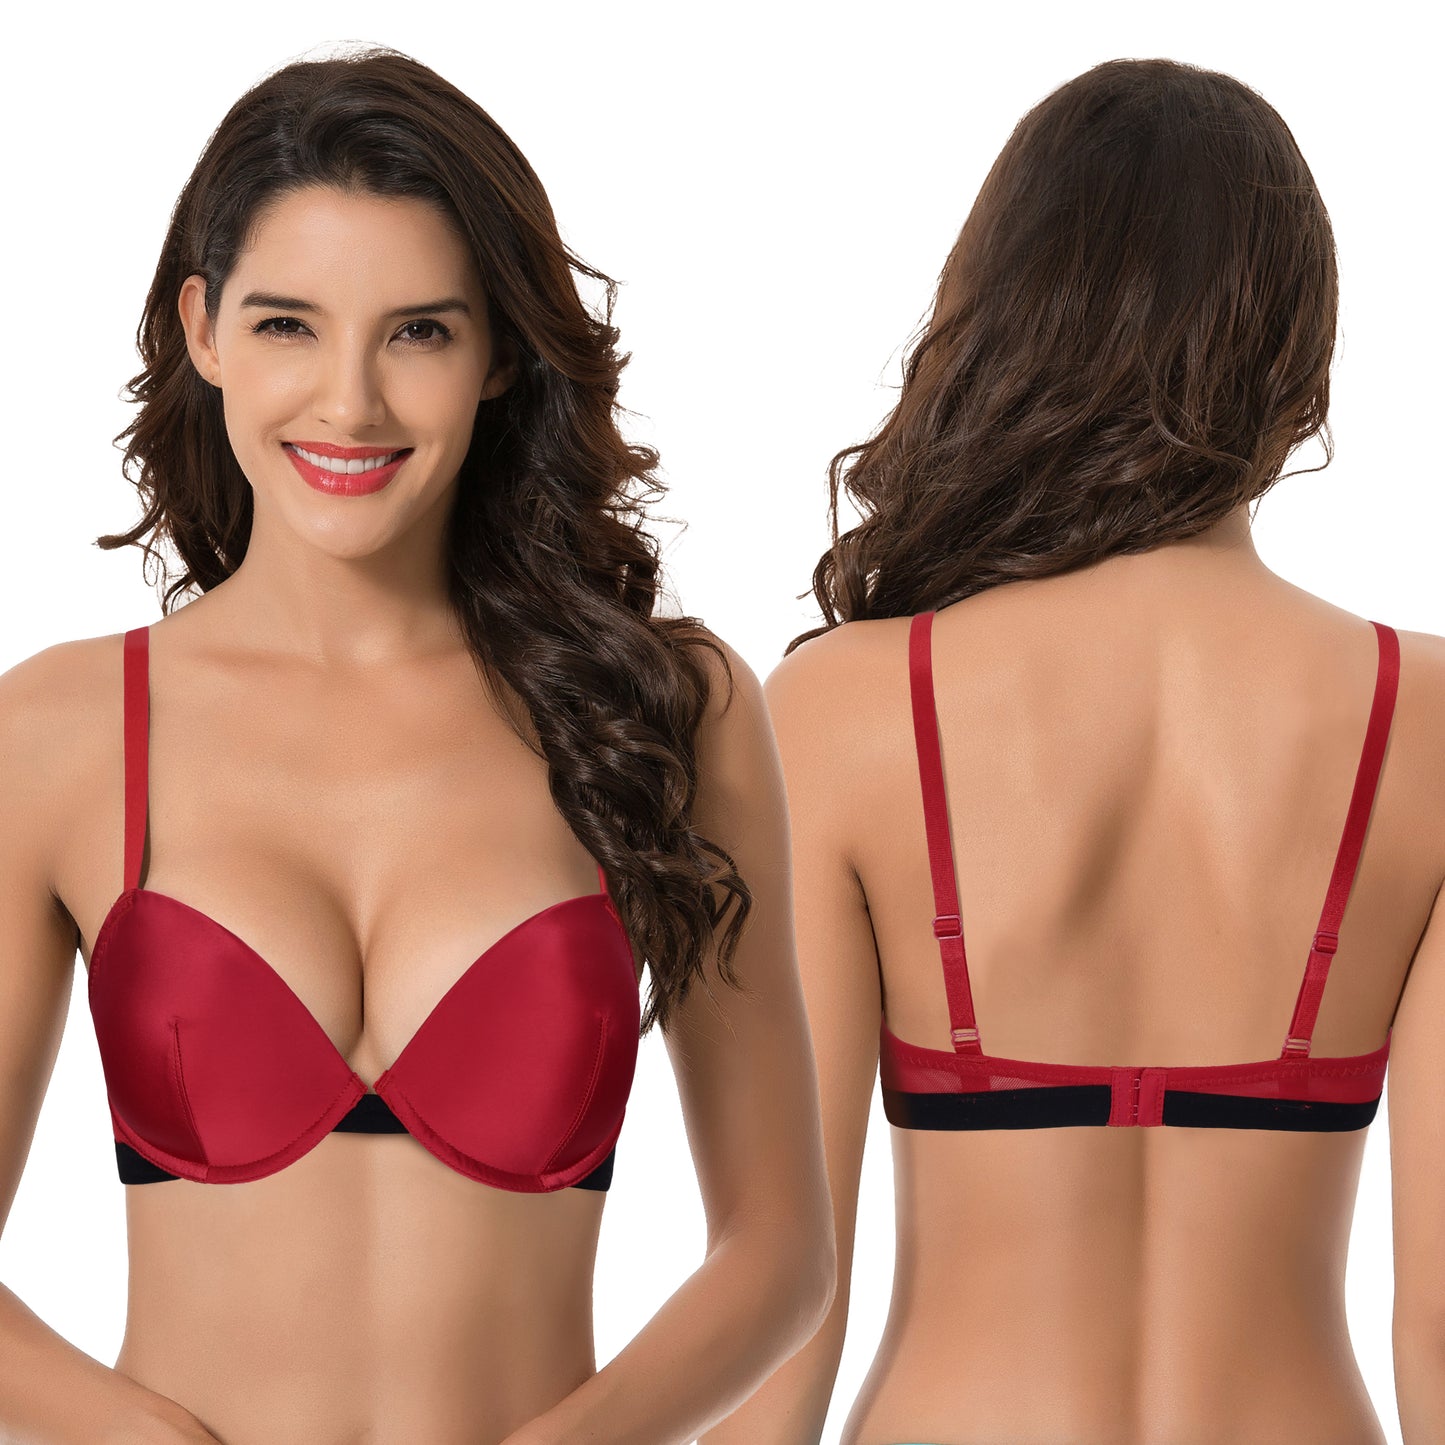 Women's Plus Size Add 1 and a half Cup Push Up Underwire Bras -2PK-Black Print,Red